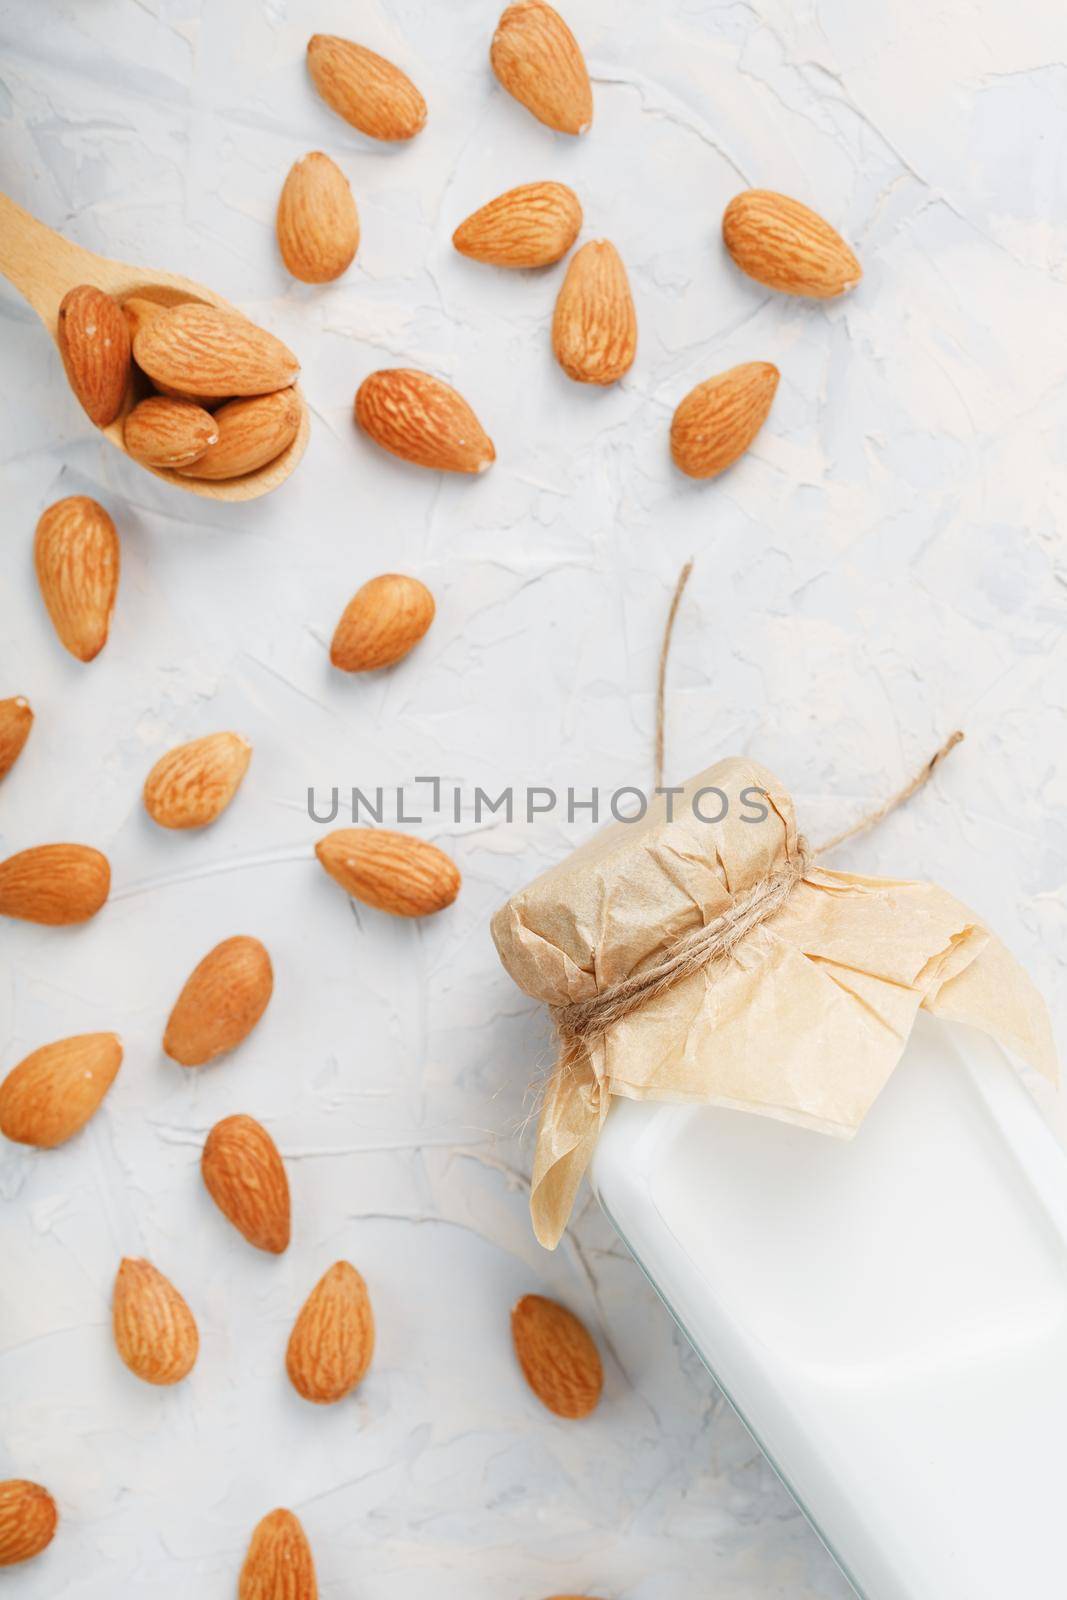 Almond milk in a glass bottle on a light background with a scattering of seed kernels and a wooden spoon. Top view